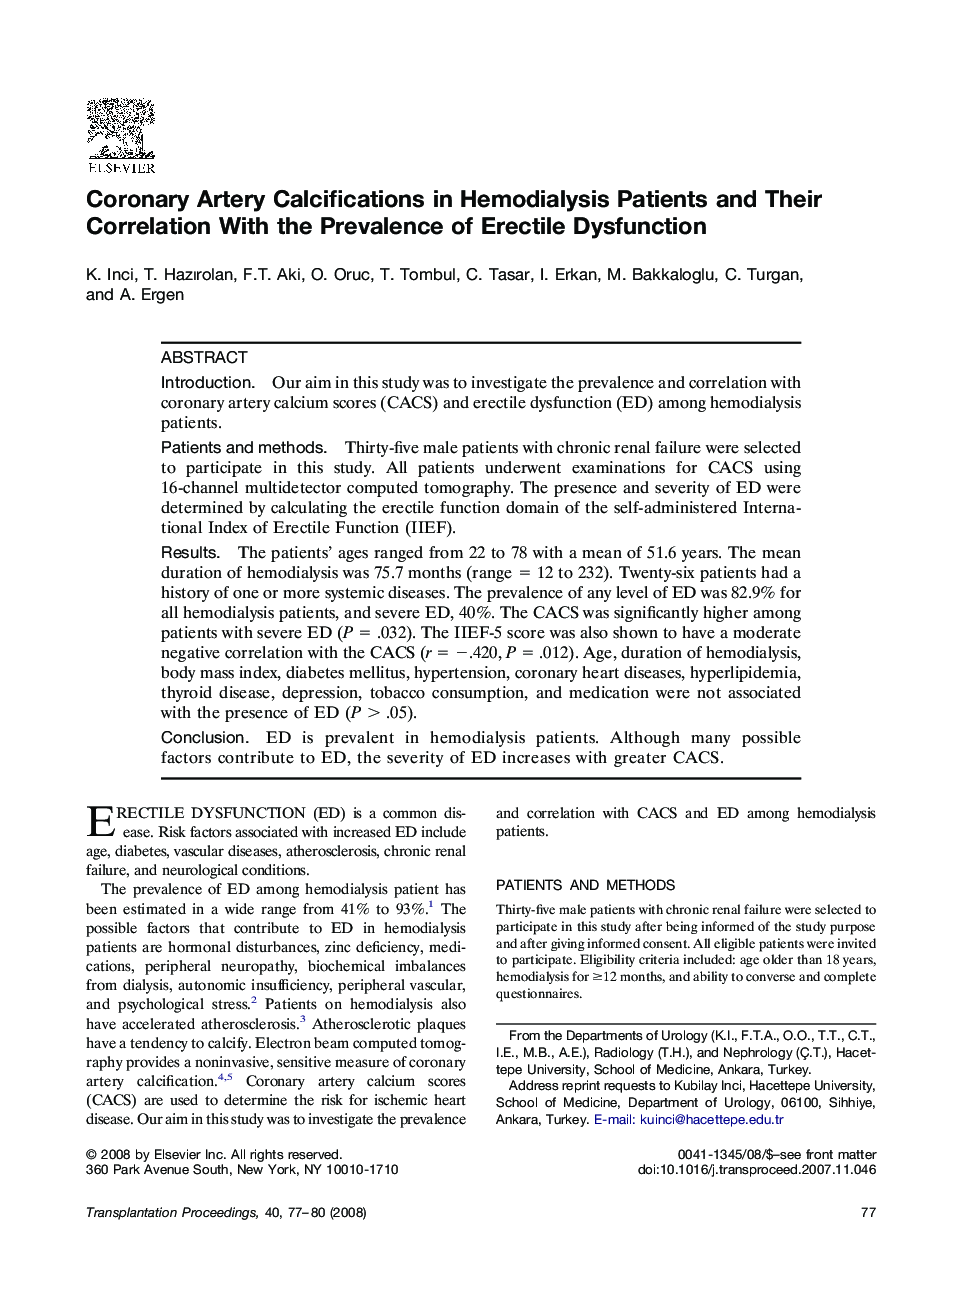 Coronary Artery Calcifications in Hemodialysis Patients and Their Correlation With the Prevalence of Erectile Dysfunction